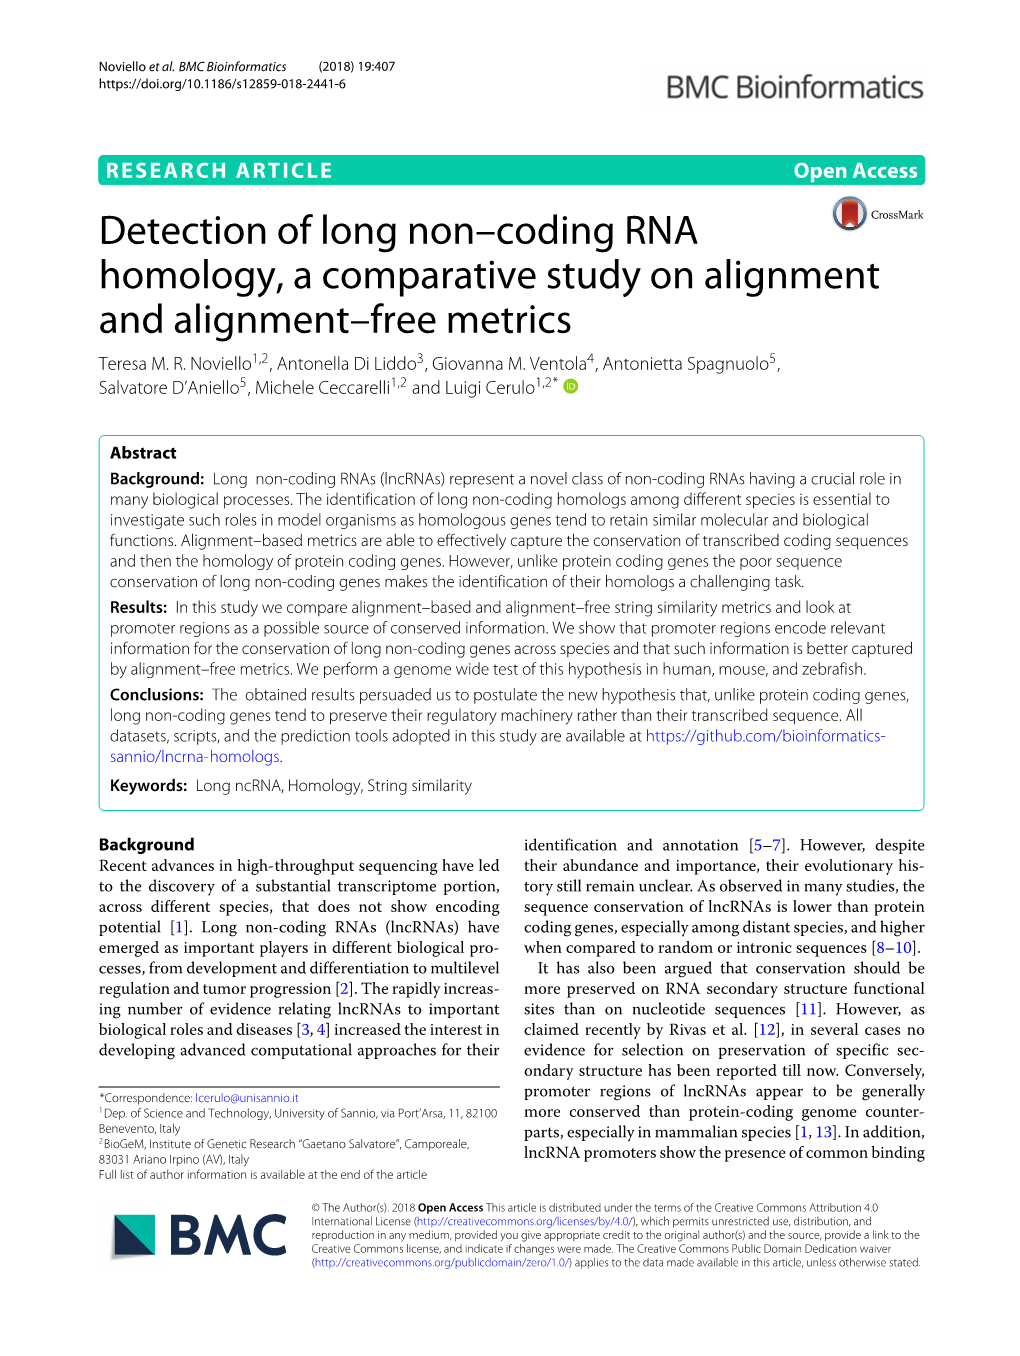 Detection of Long Non-Coding RNA Homology, a Comparative Study on Alignment and Alignment-Free Metrics